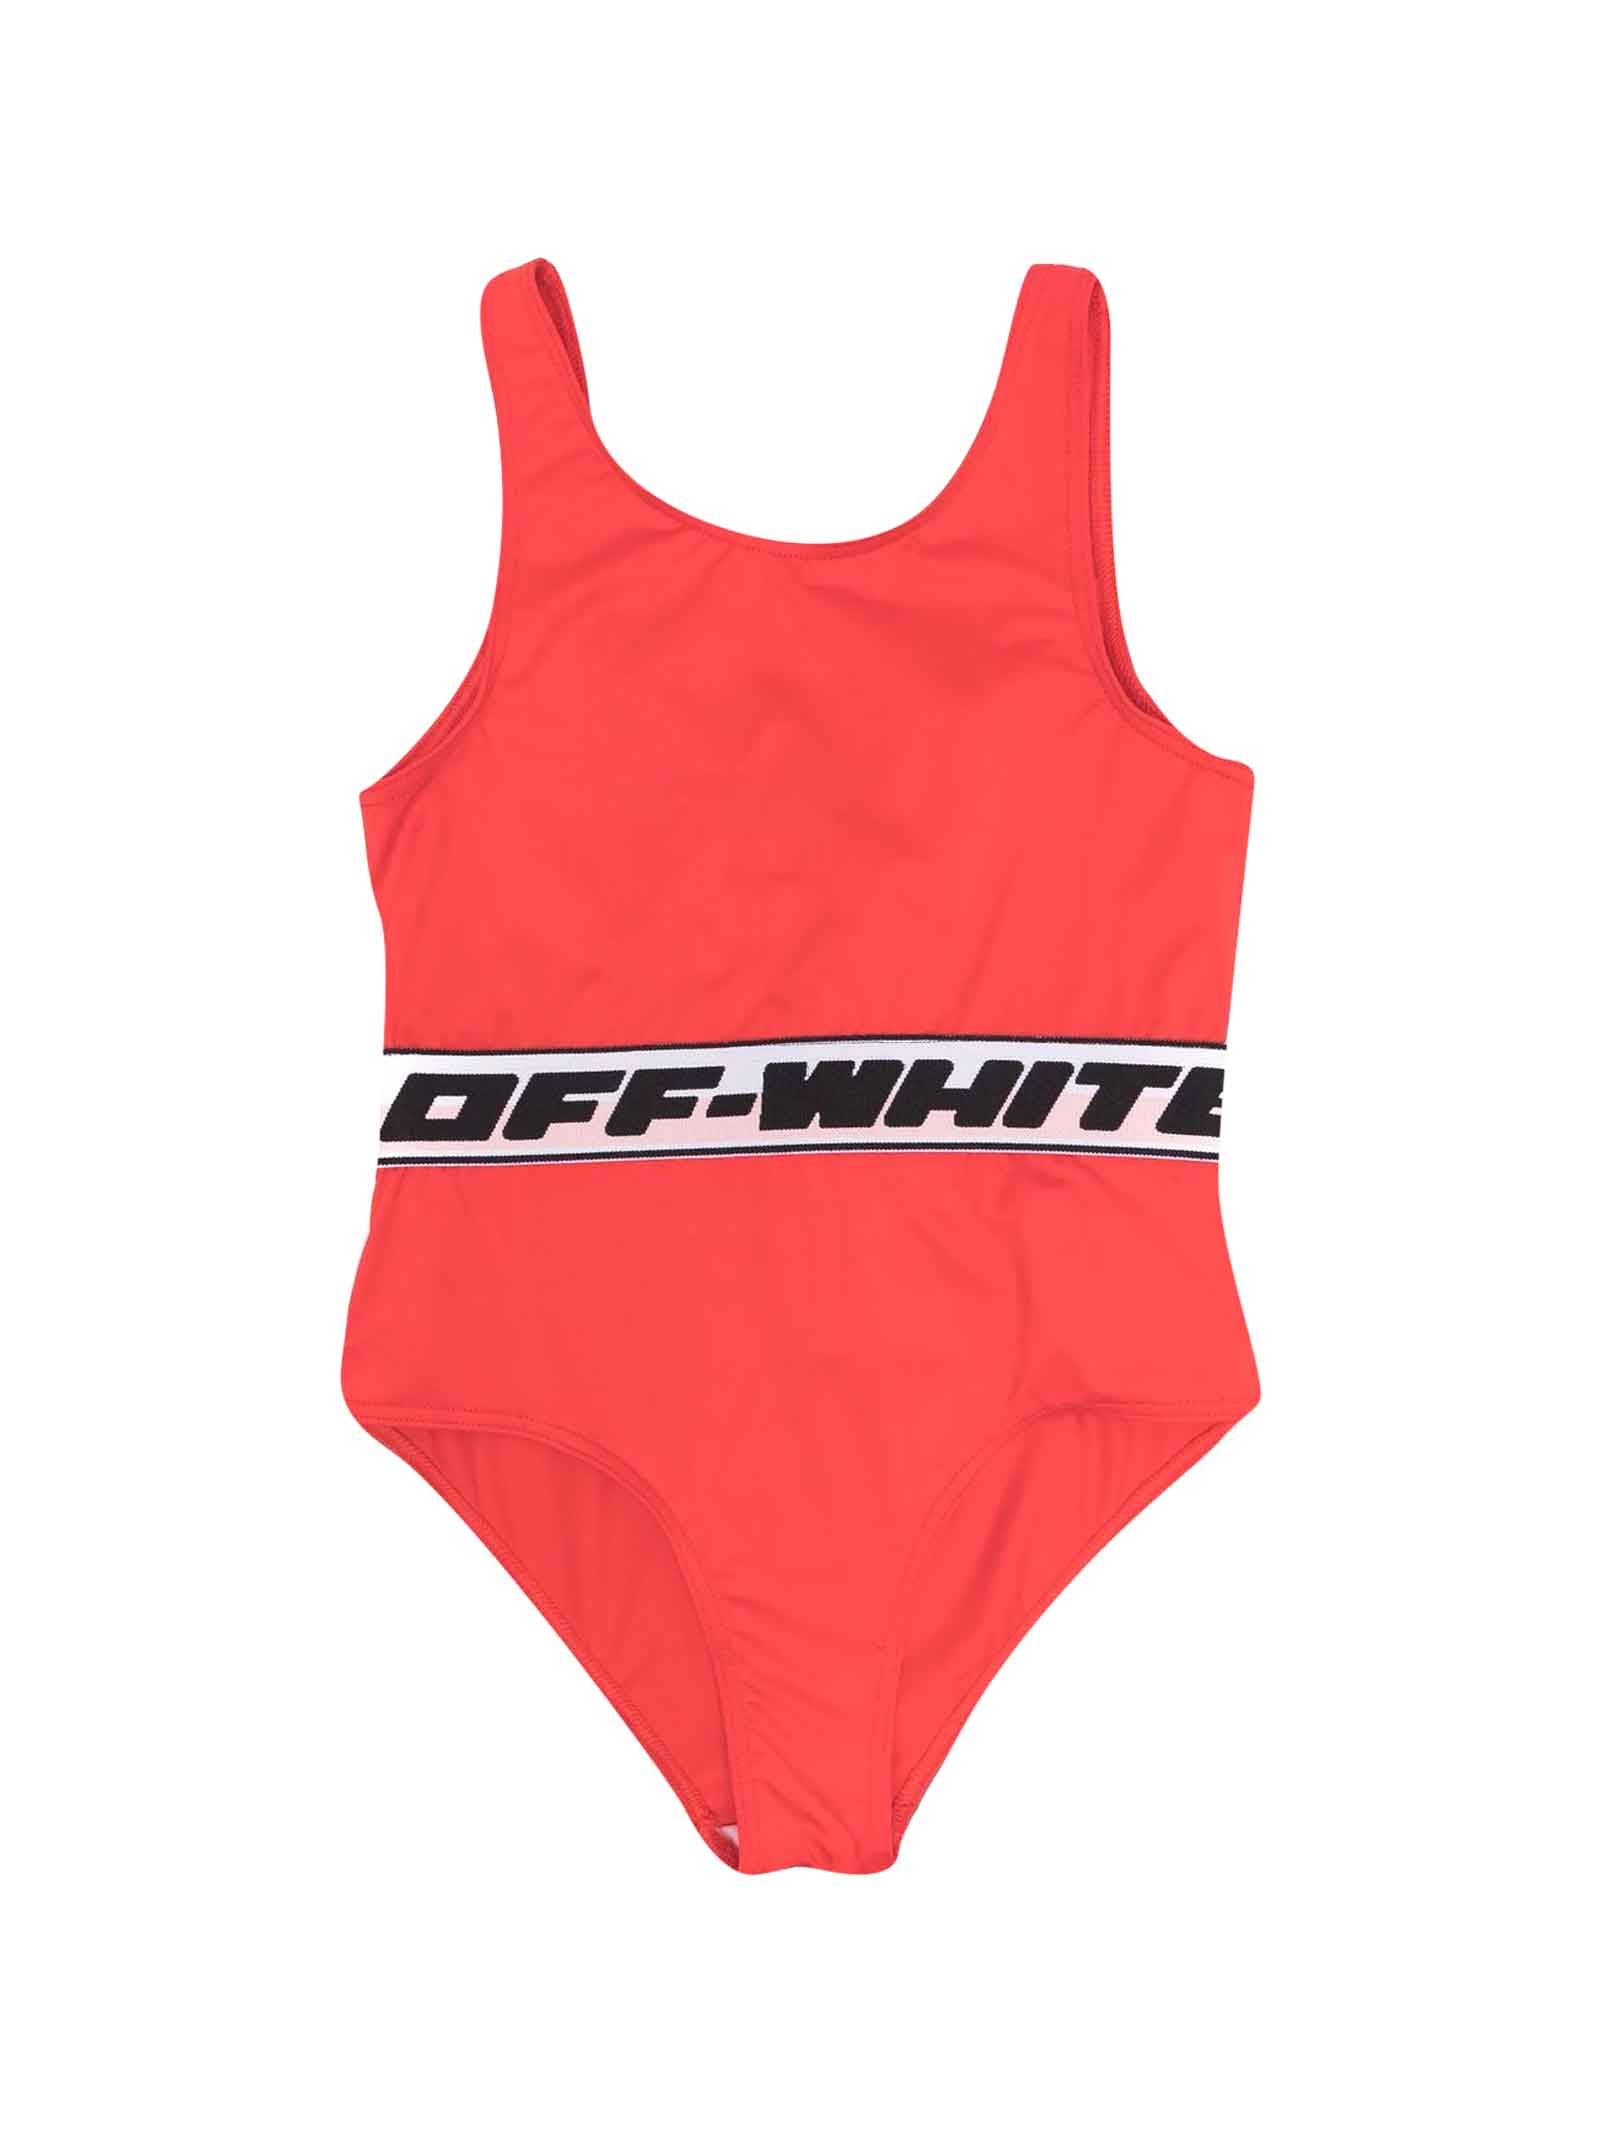 Off-White Red Swimsuit Girl